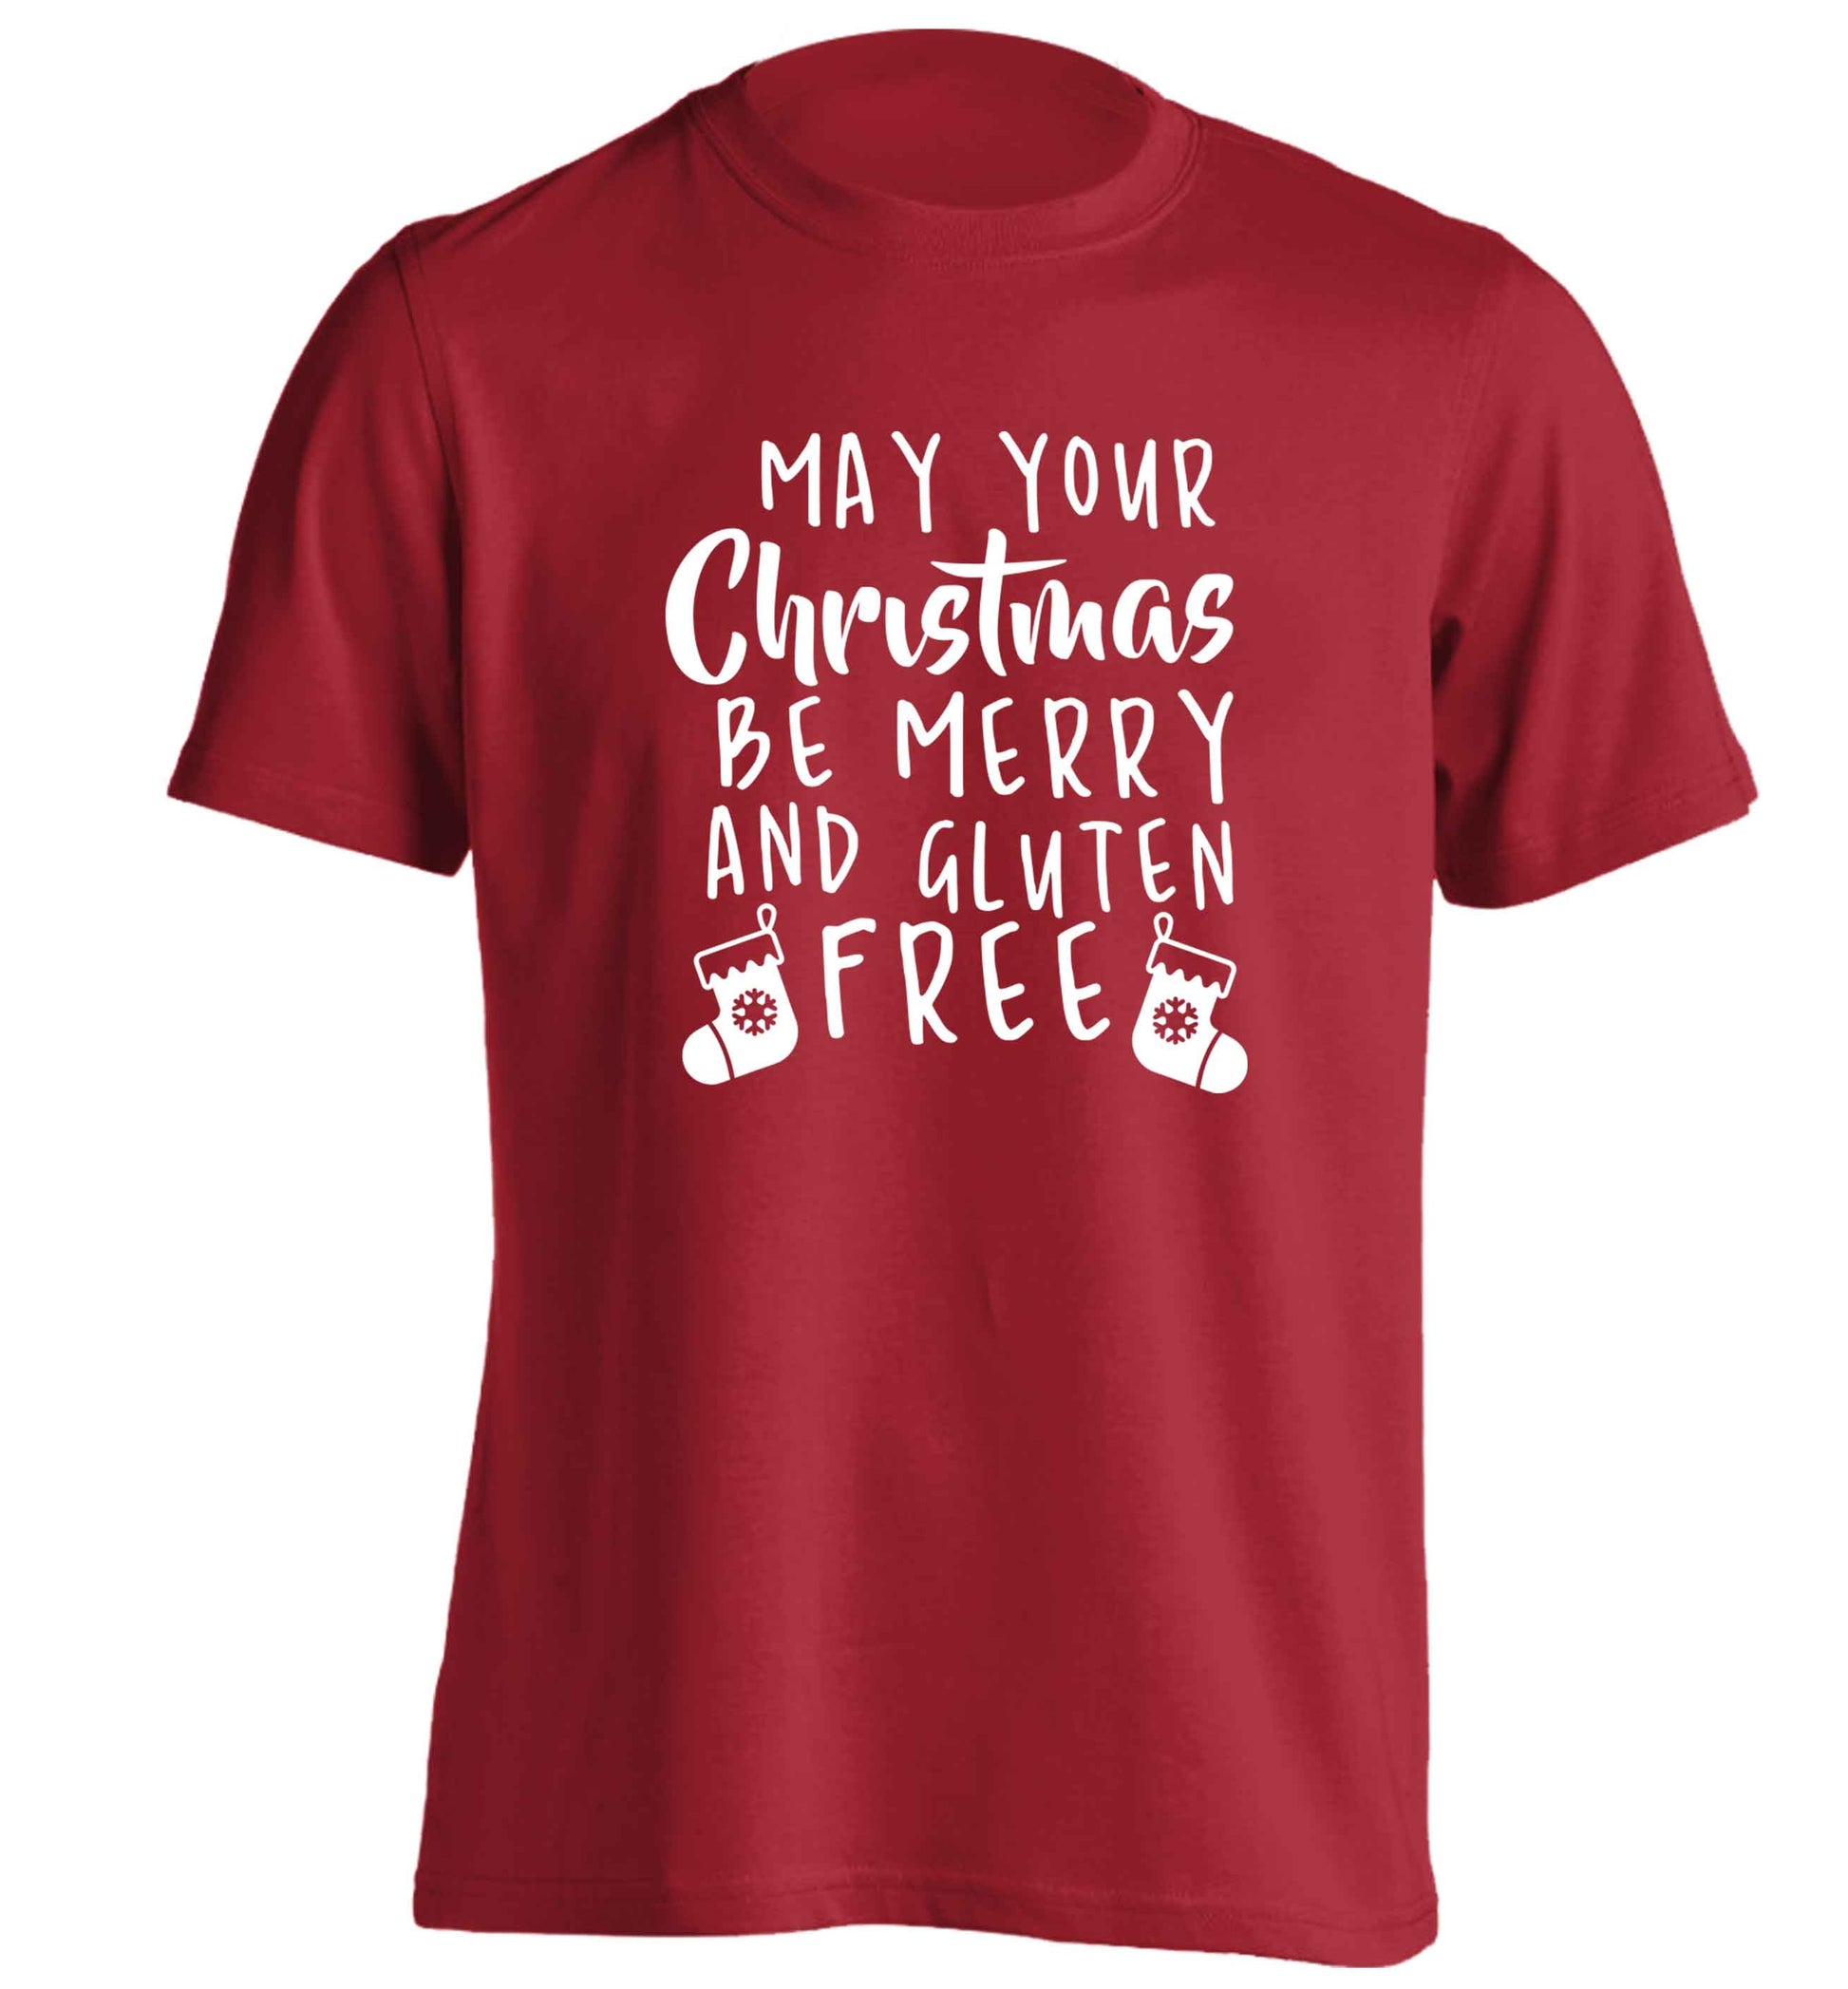 May your Christmas be merry and gluten free adults unisex red Tshirt 2XL